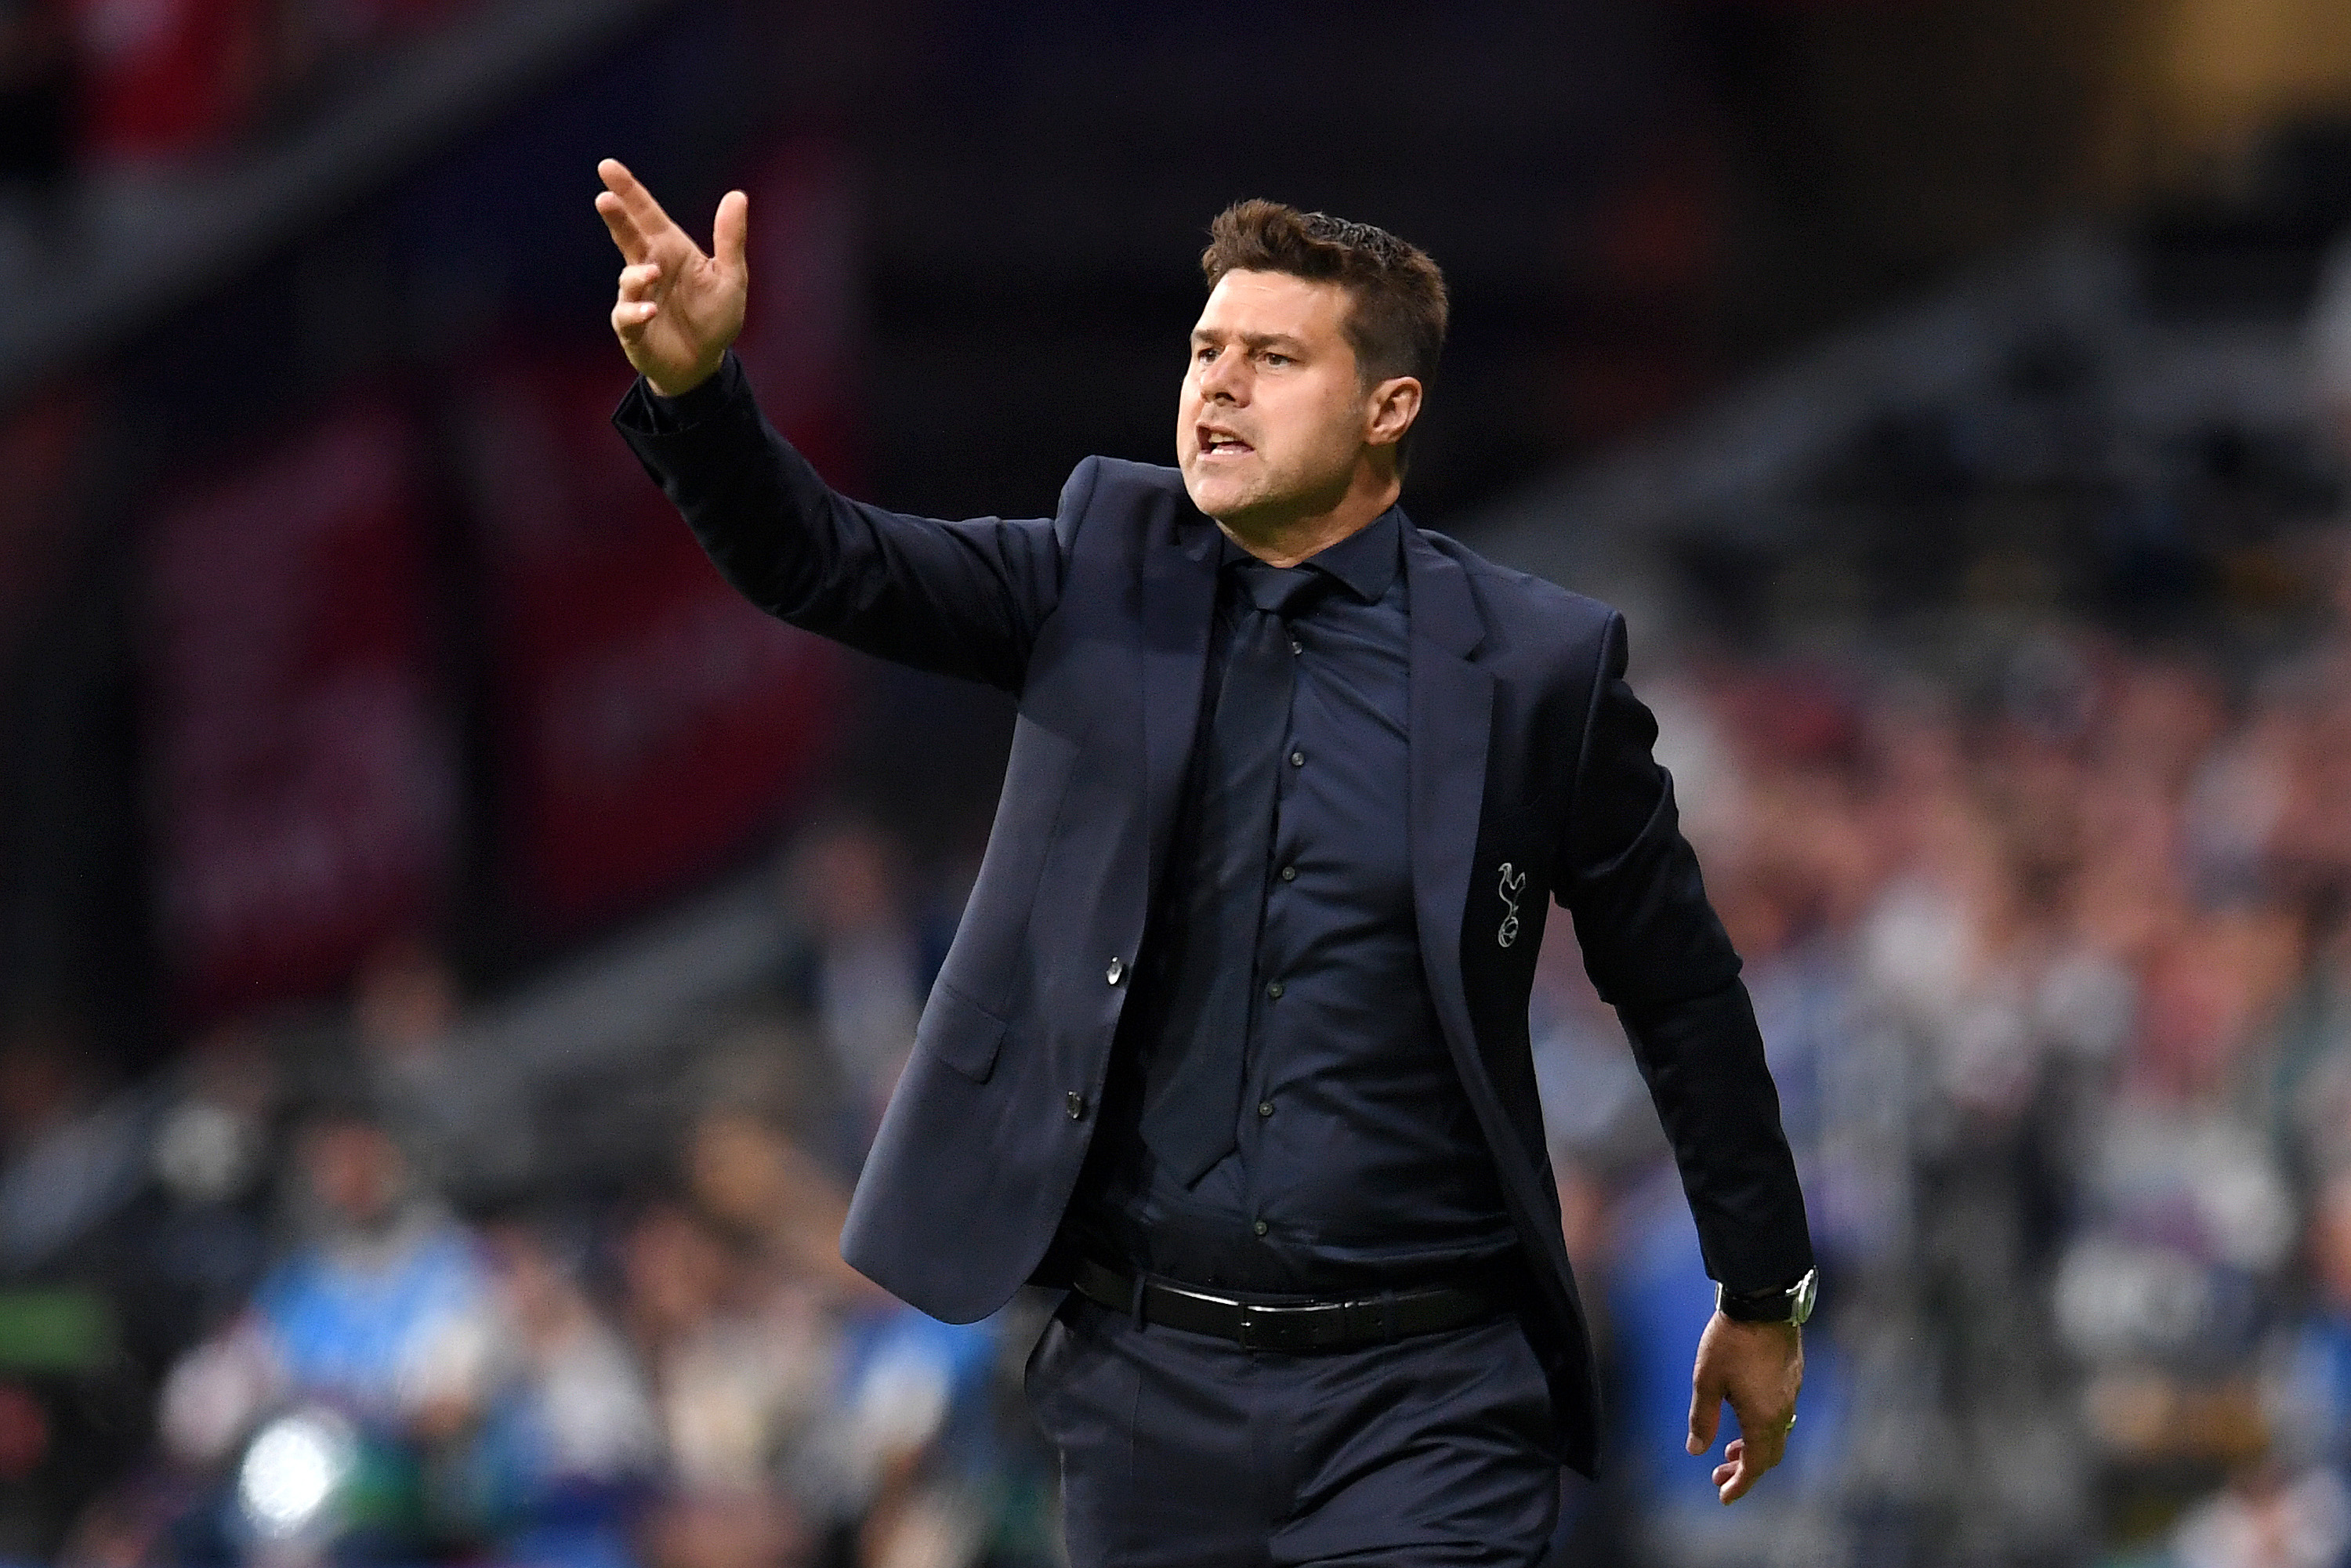 MADRID, SPAIN - JUNE 01: Mauricio Pochettino, Manager of Tottenham Hotspur gives instructions to his team during the UEFA Champions League Final between Tottenham Hotspur and Liverpool at Estadio Wanda Metropolitano on June 01, 2019 in Madrid, Spain. (Photo by Matthias Hangst/Getty Images)